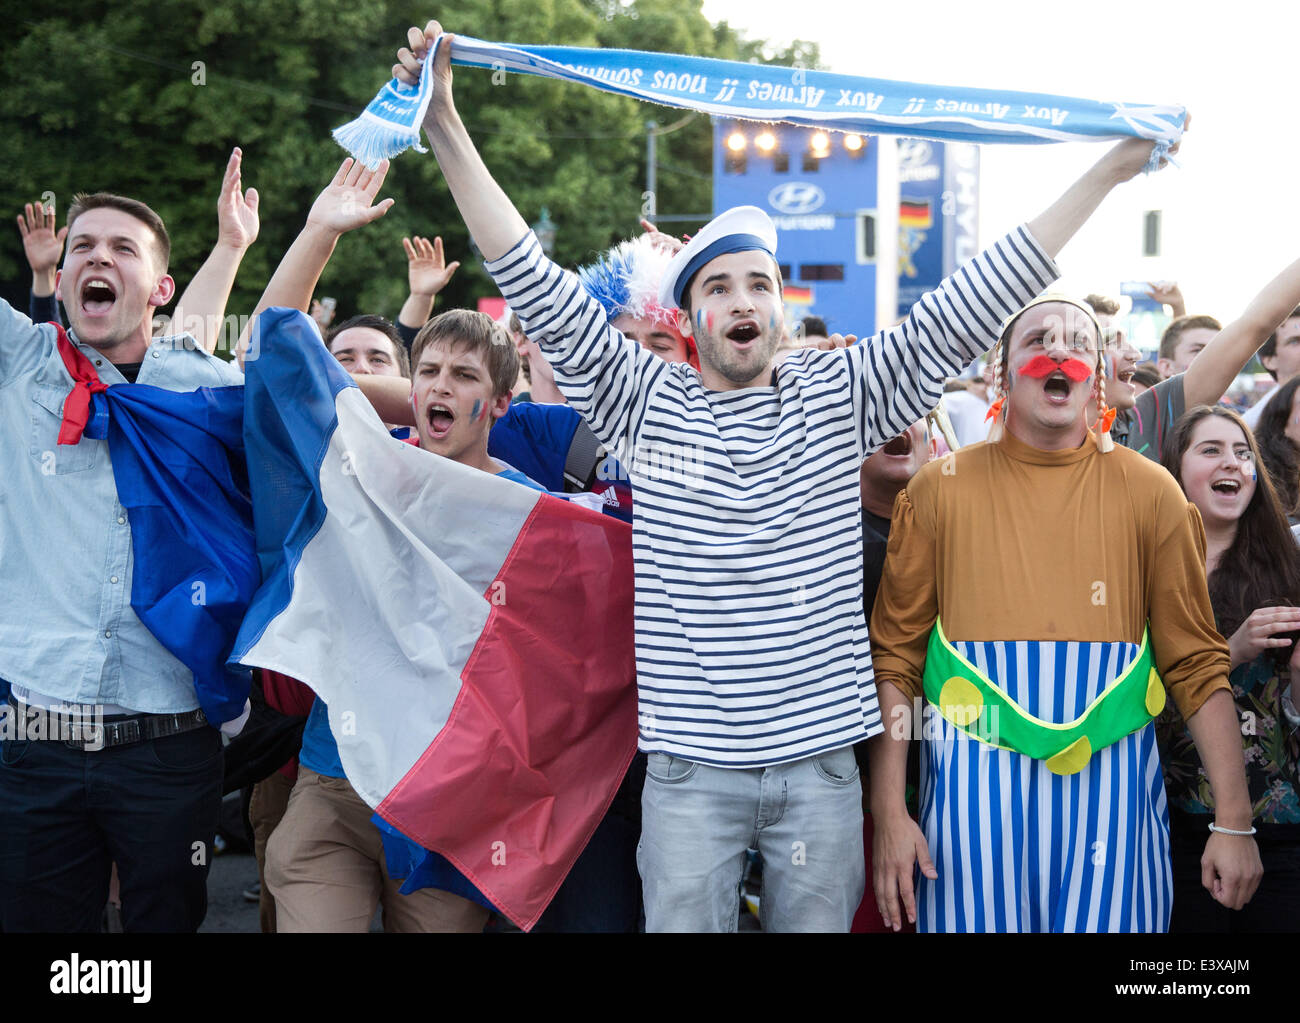 Fans cheer after France wins in the Brazil 2014 World Cup match against Nigeria at a Public Viewing event at the Brandeburg Gate in Berlin, Germany, 30 June 2014. Photo: Joerg Carstensen Stock Photo